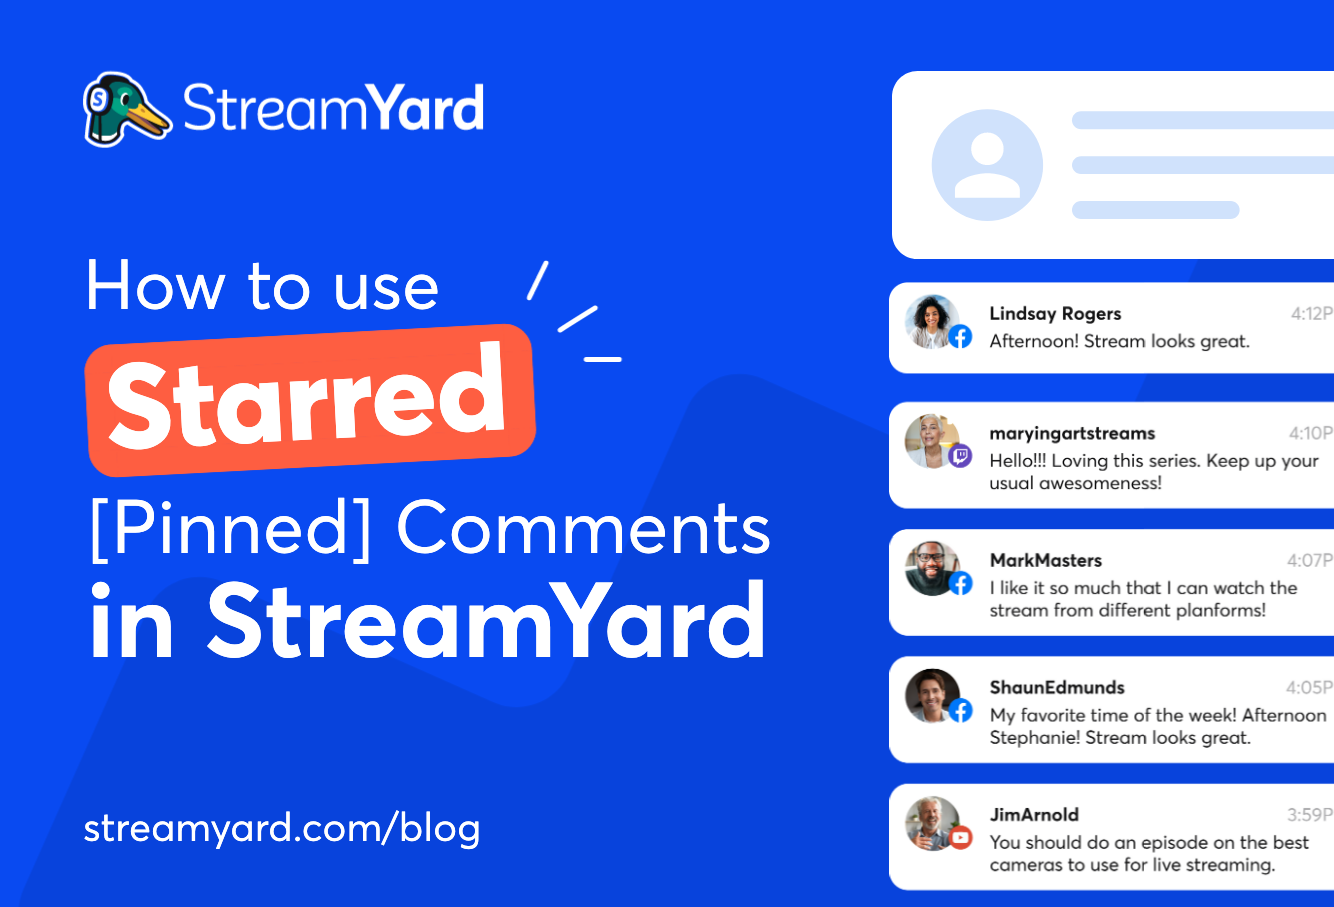 How To Use Starred Comments (Pinned Comments) In StreamYard